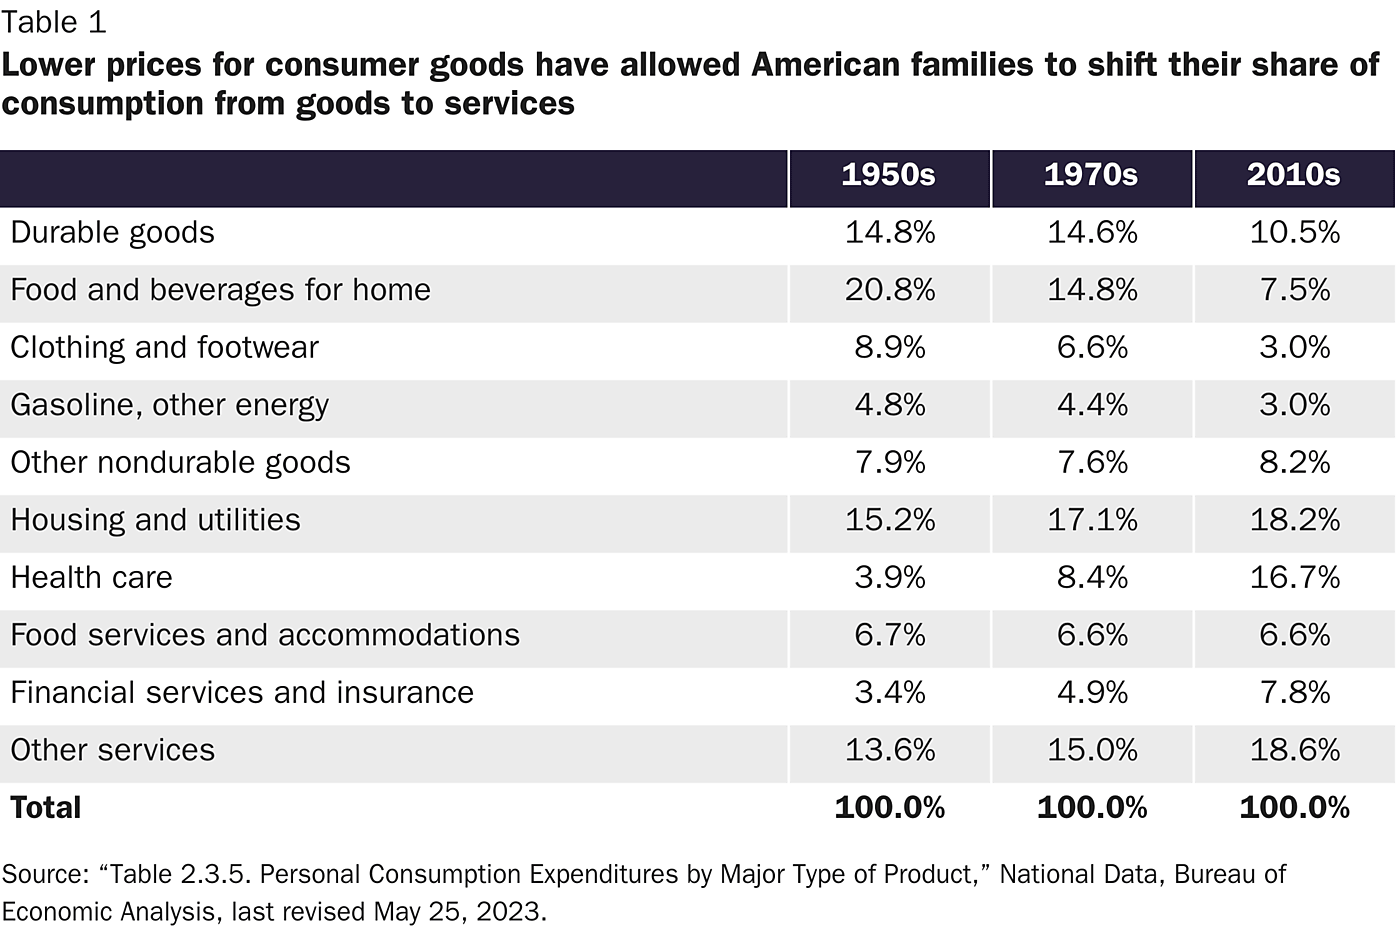 table-1-lower-prices-for-consumer-goods-have-allowed-american-families-to-shift-their-share-of-consumption-from-goods-to-services